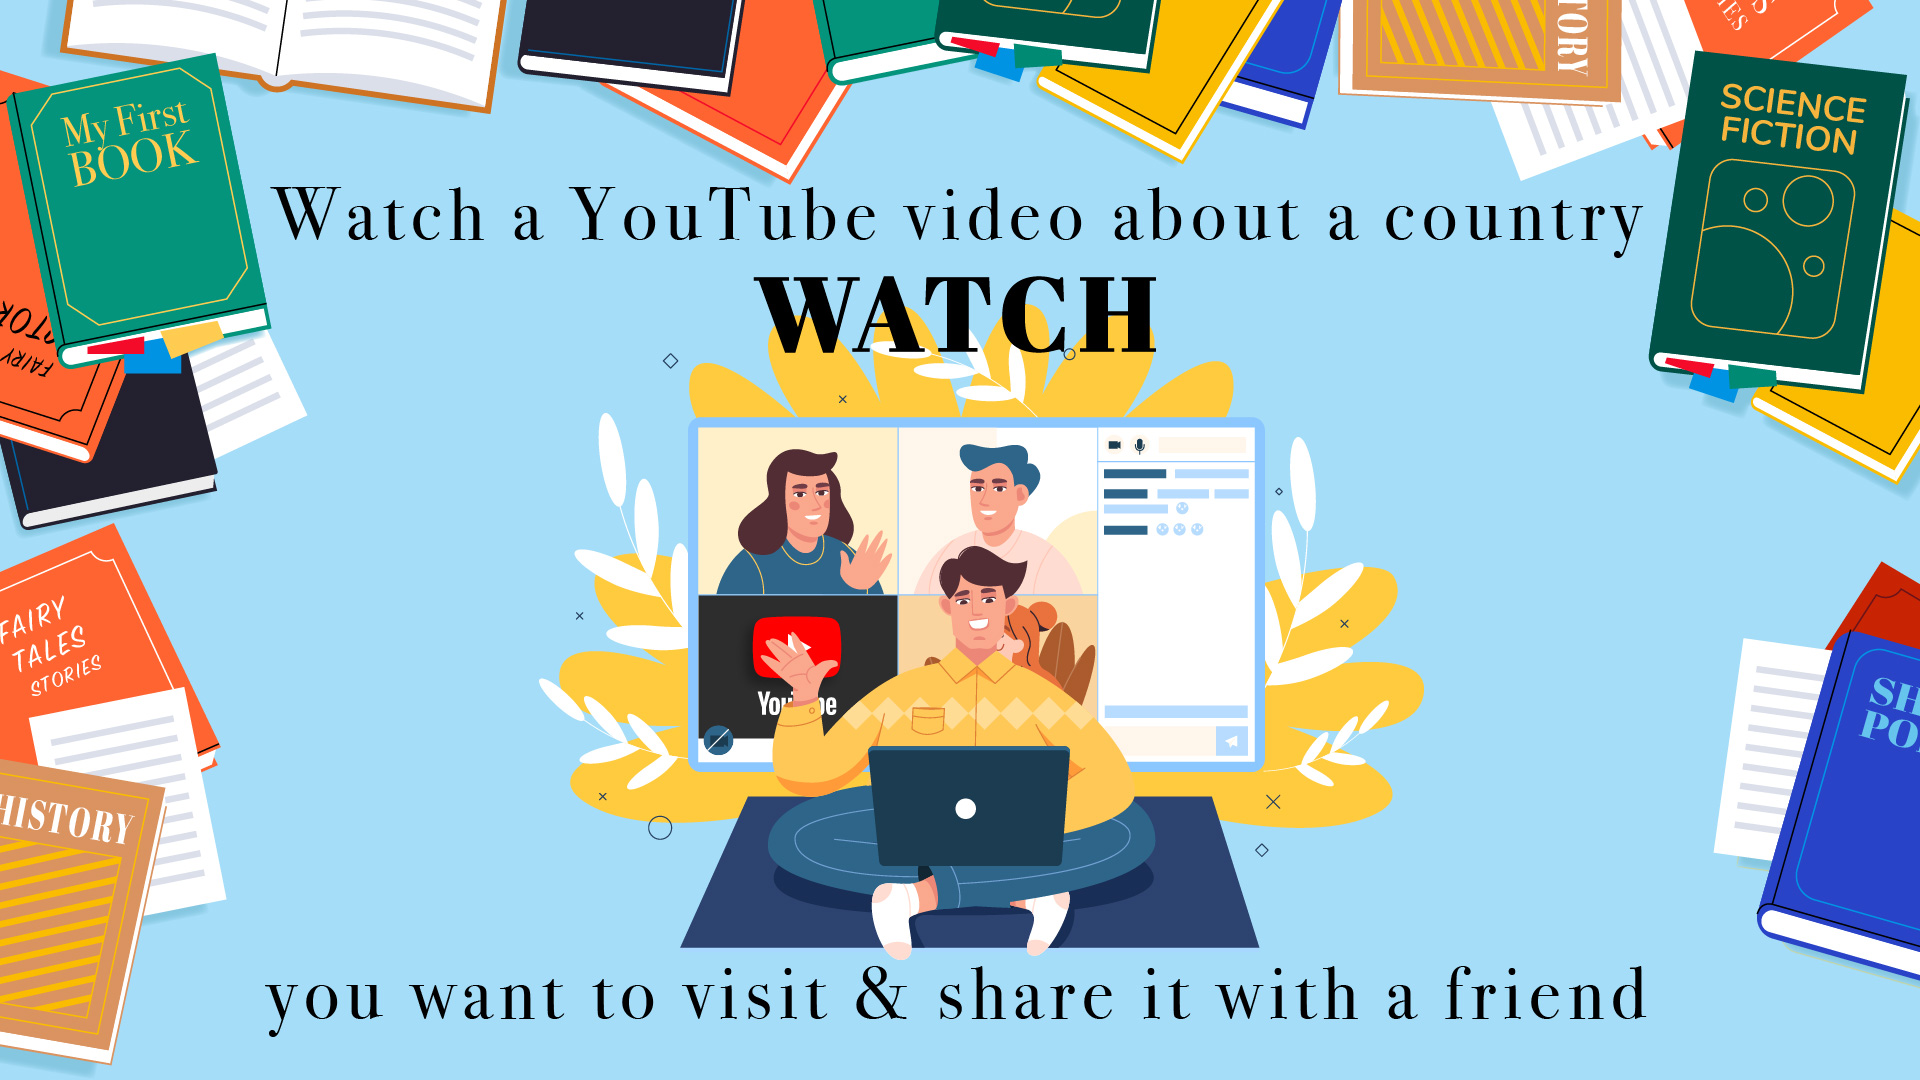 Books border, headline- first line: Watch a YouTube video about a country second line: WATCH third line: you want to visit & share it with a friend graphics of a boy sat on floor with laptop open and zoom as background with his three friends and watch youtube together.